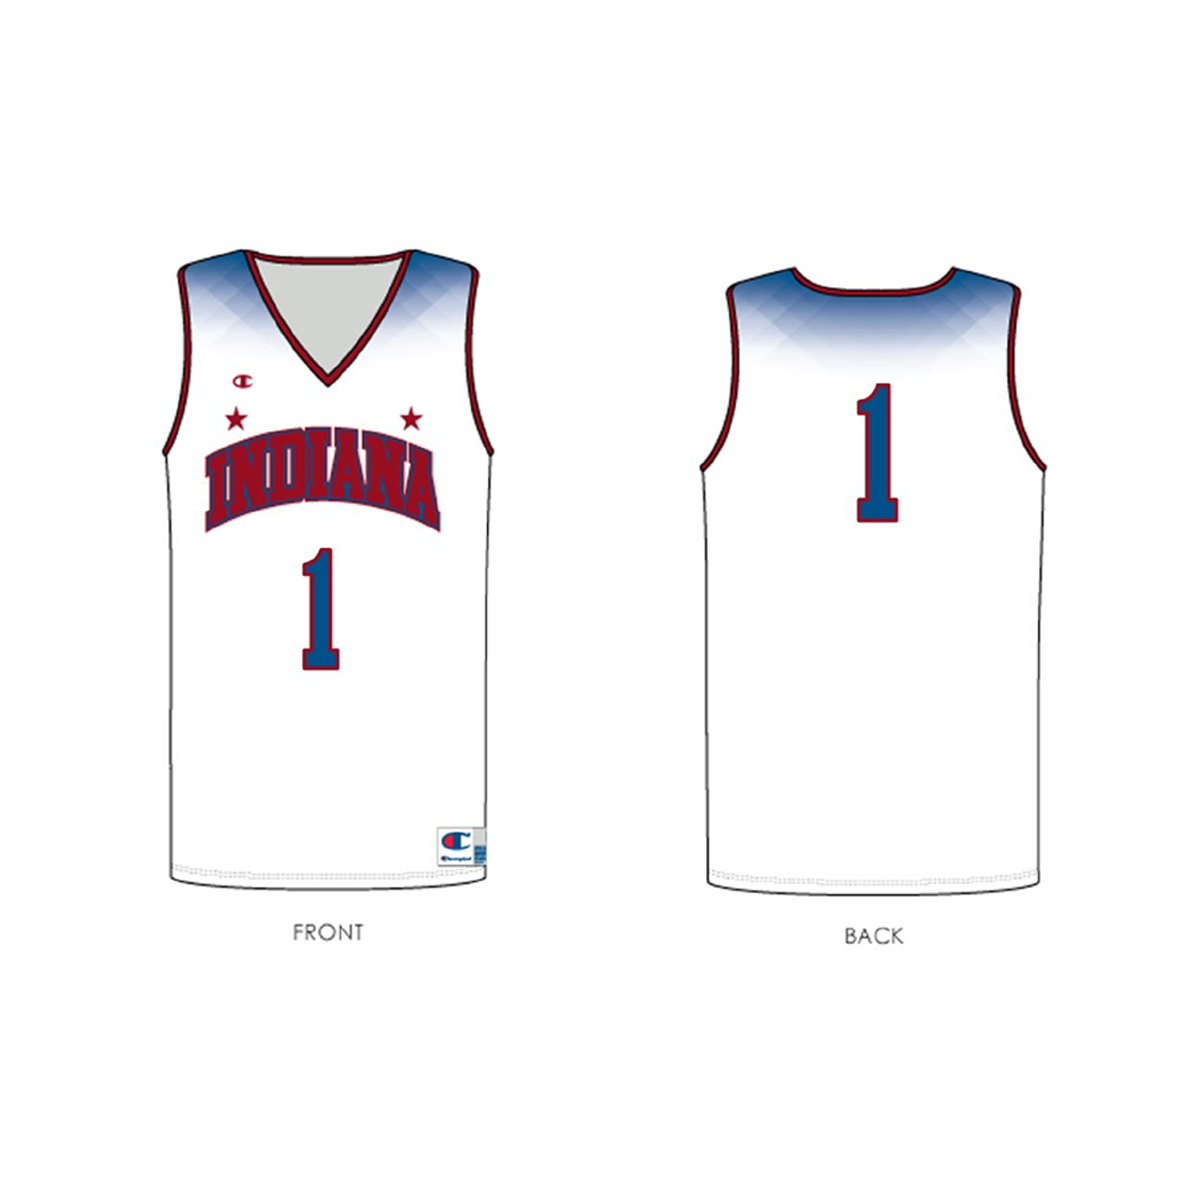 Western Conference All-Star Jersey